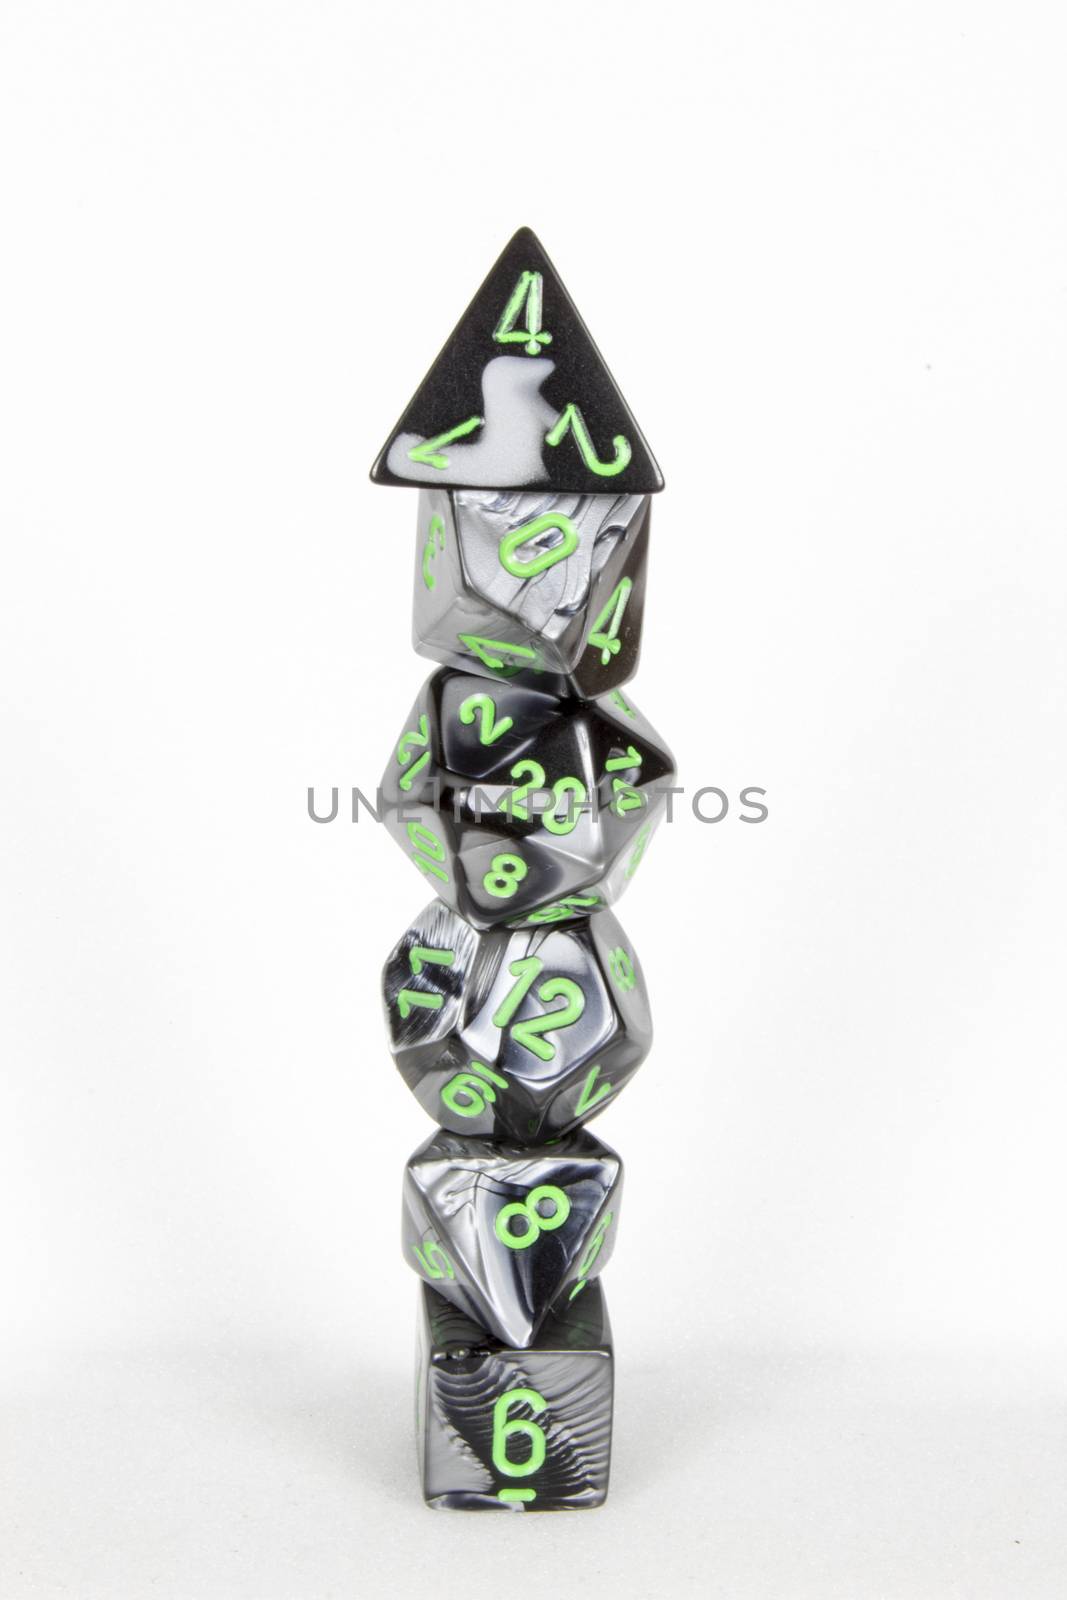 Poly dice tower black white and green by bluiten